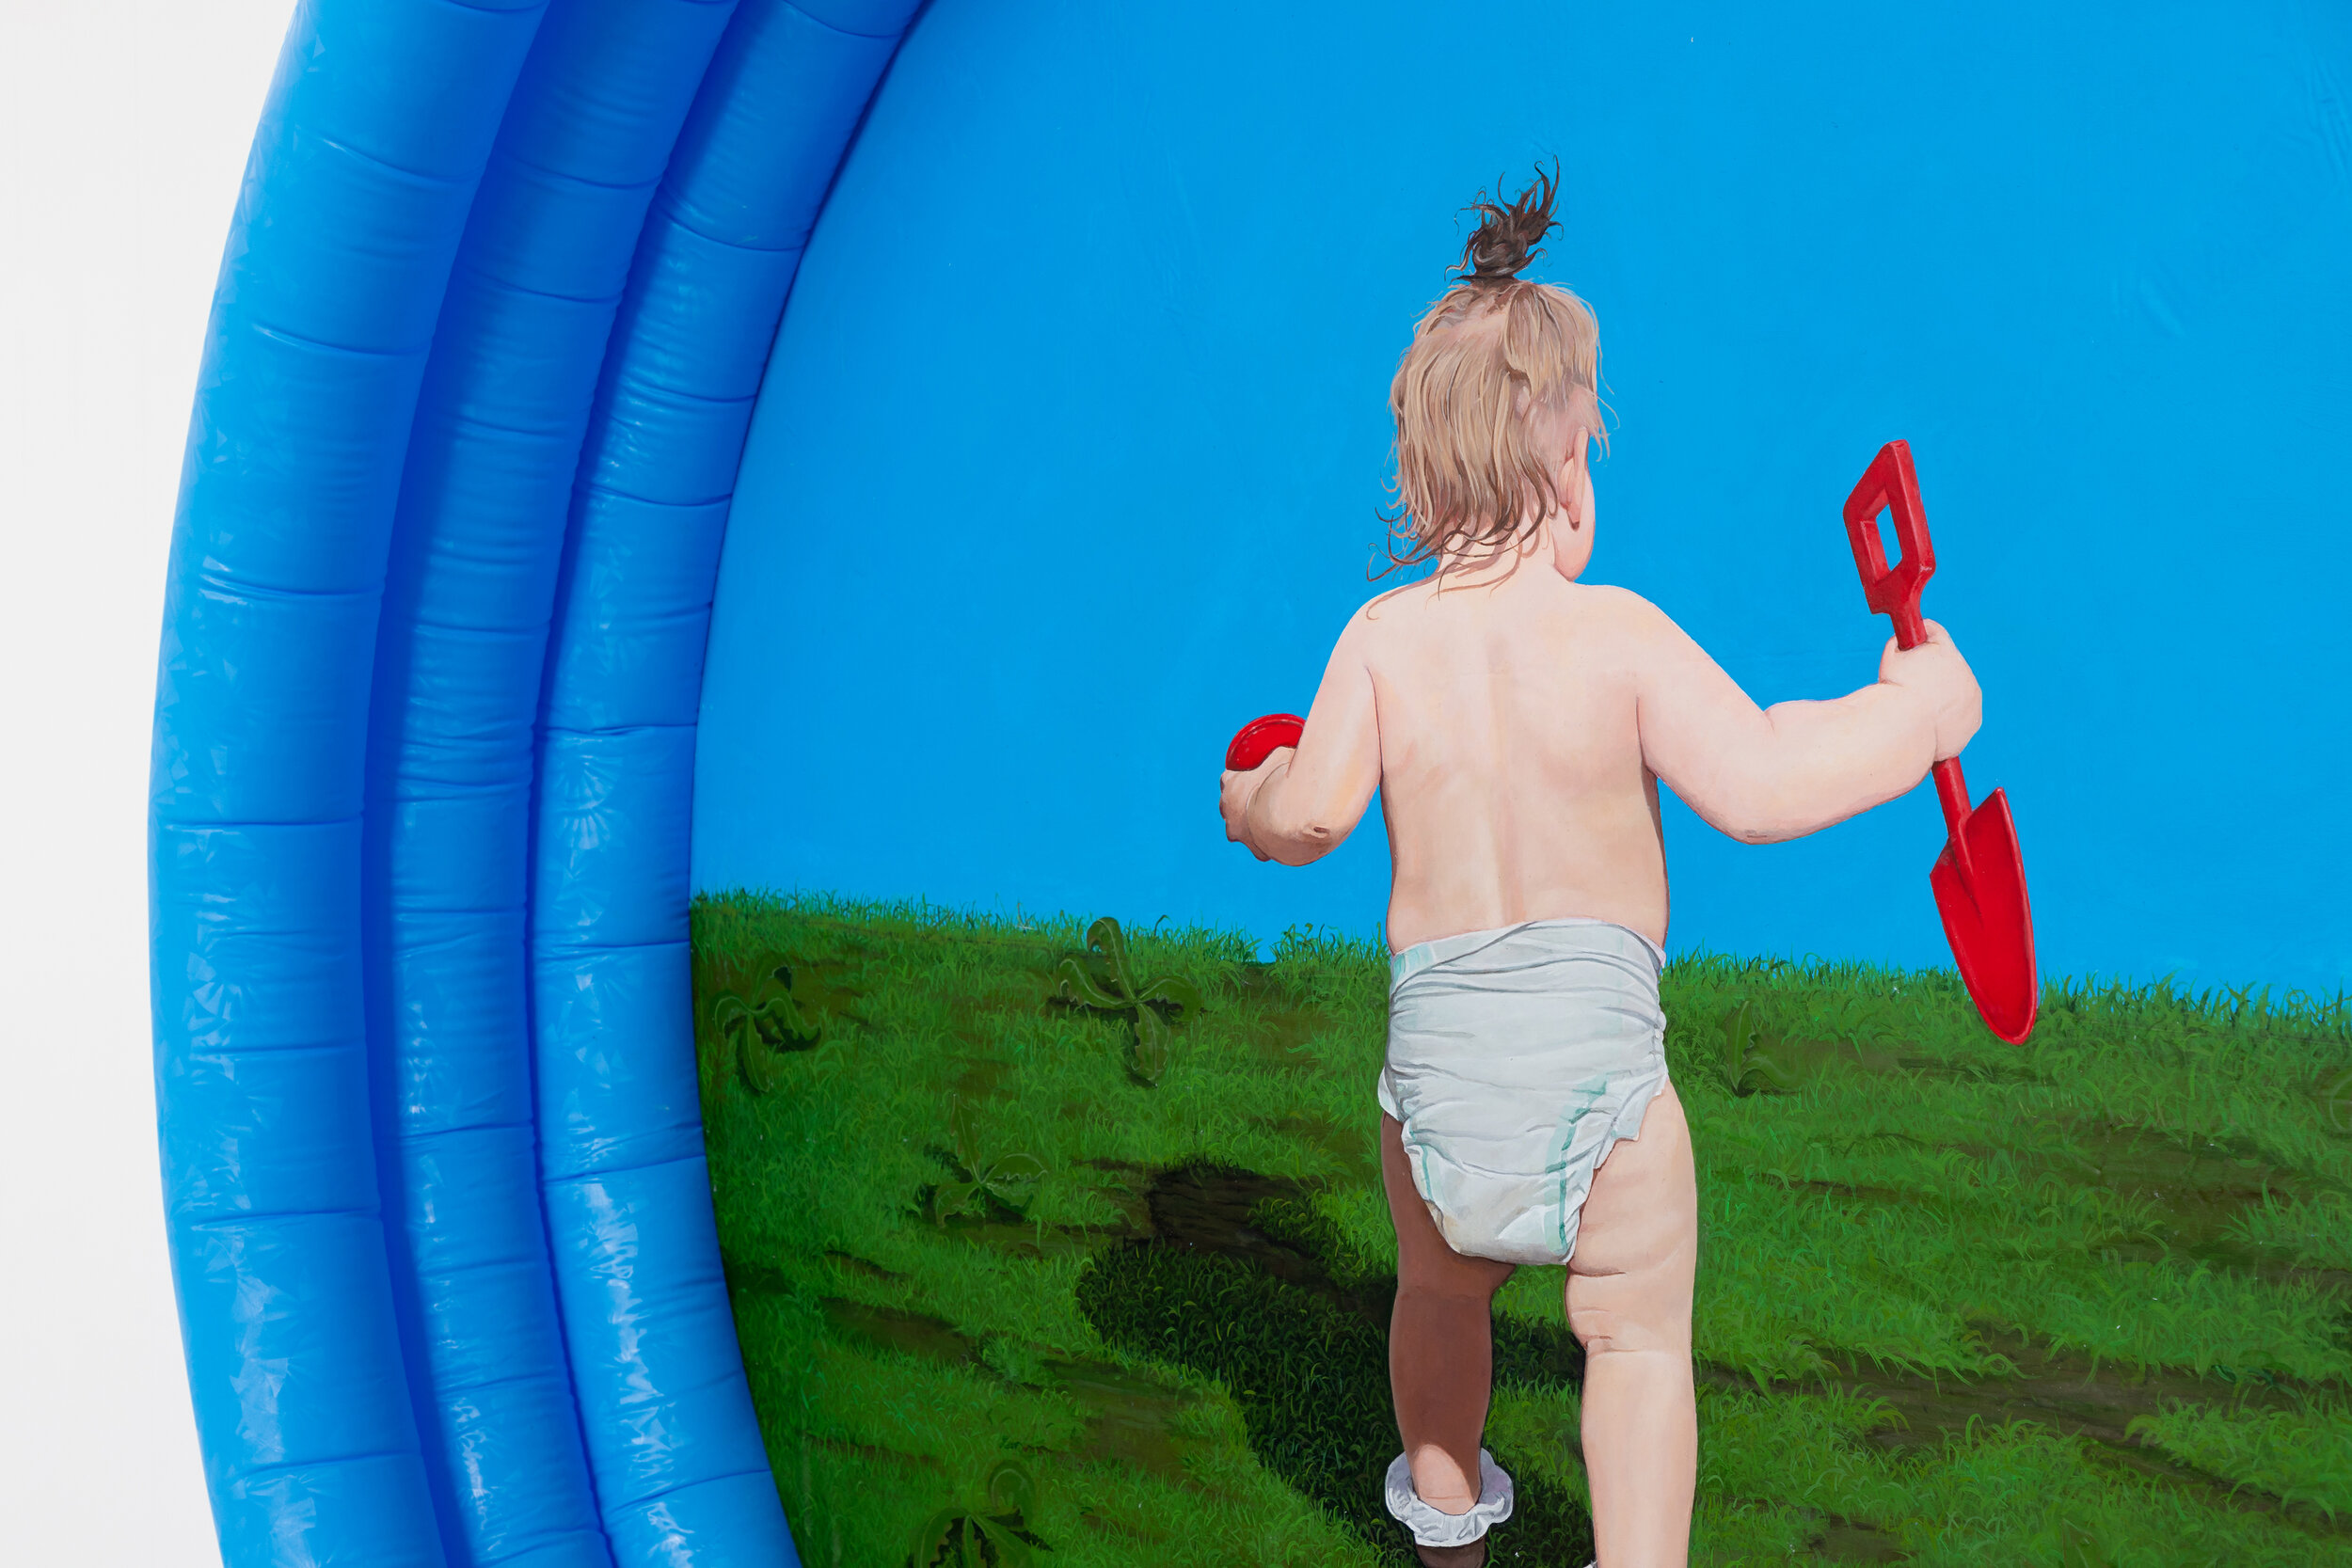 Conor Rogers 'Harriet' 2021, Acrlic on Paddling Pool, Detailed image, Exhibition 'Manor Boy'.jpg